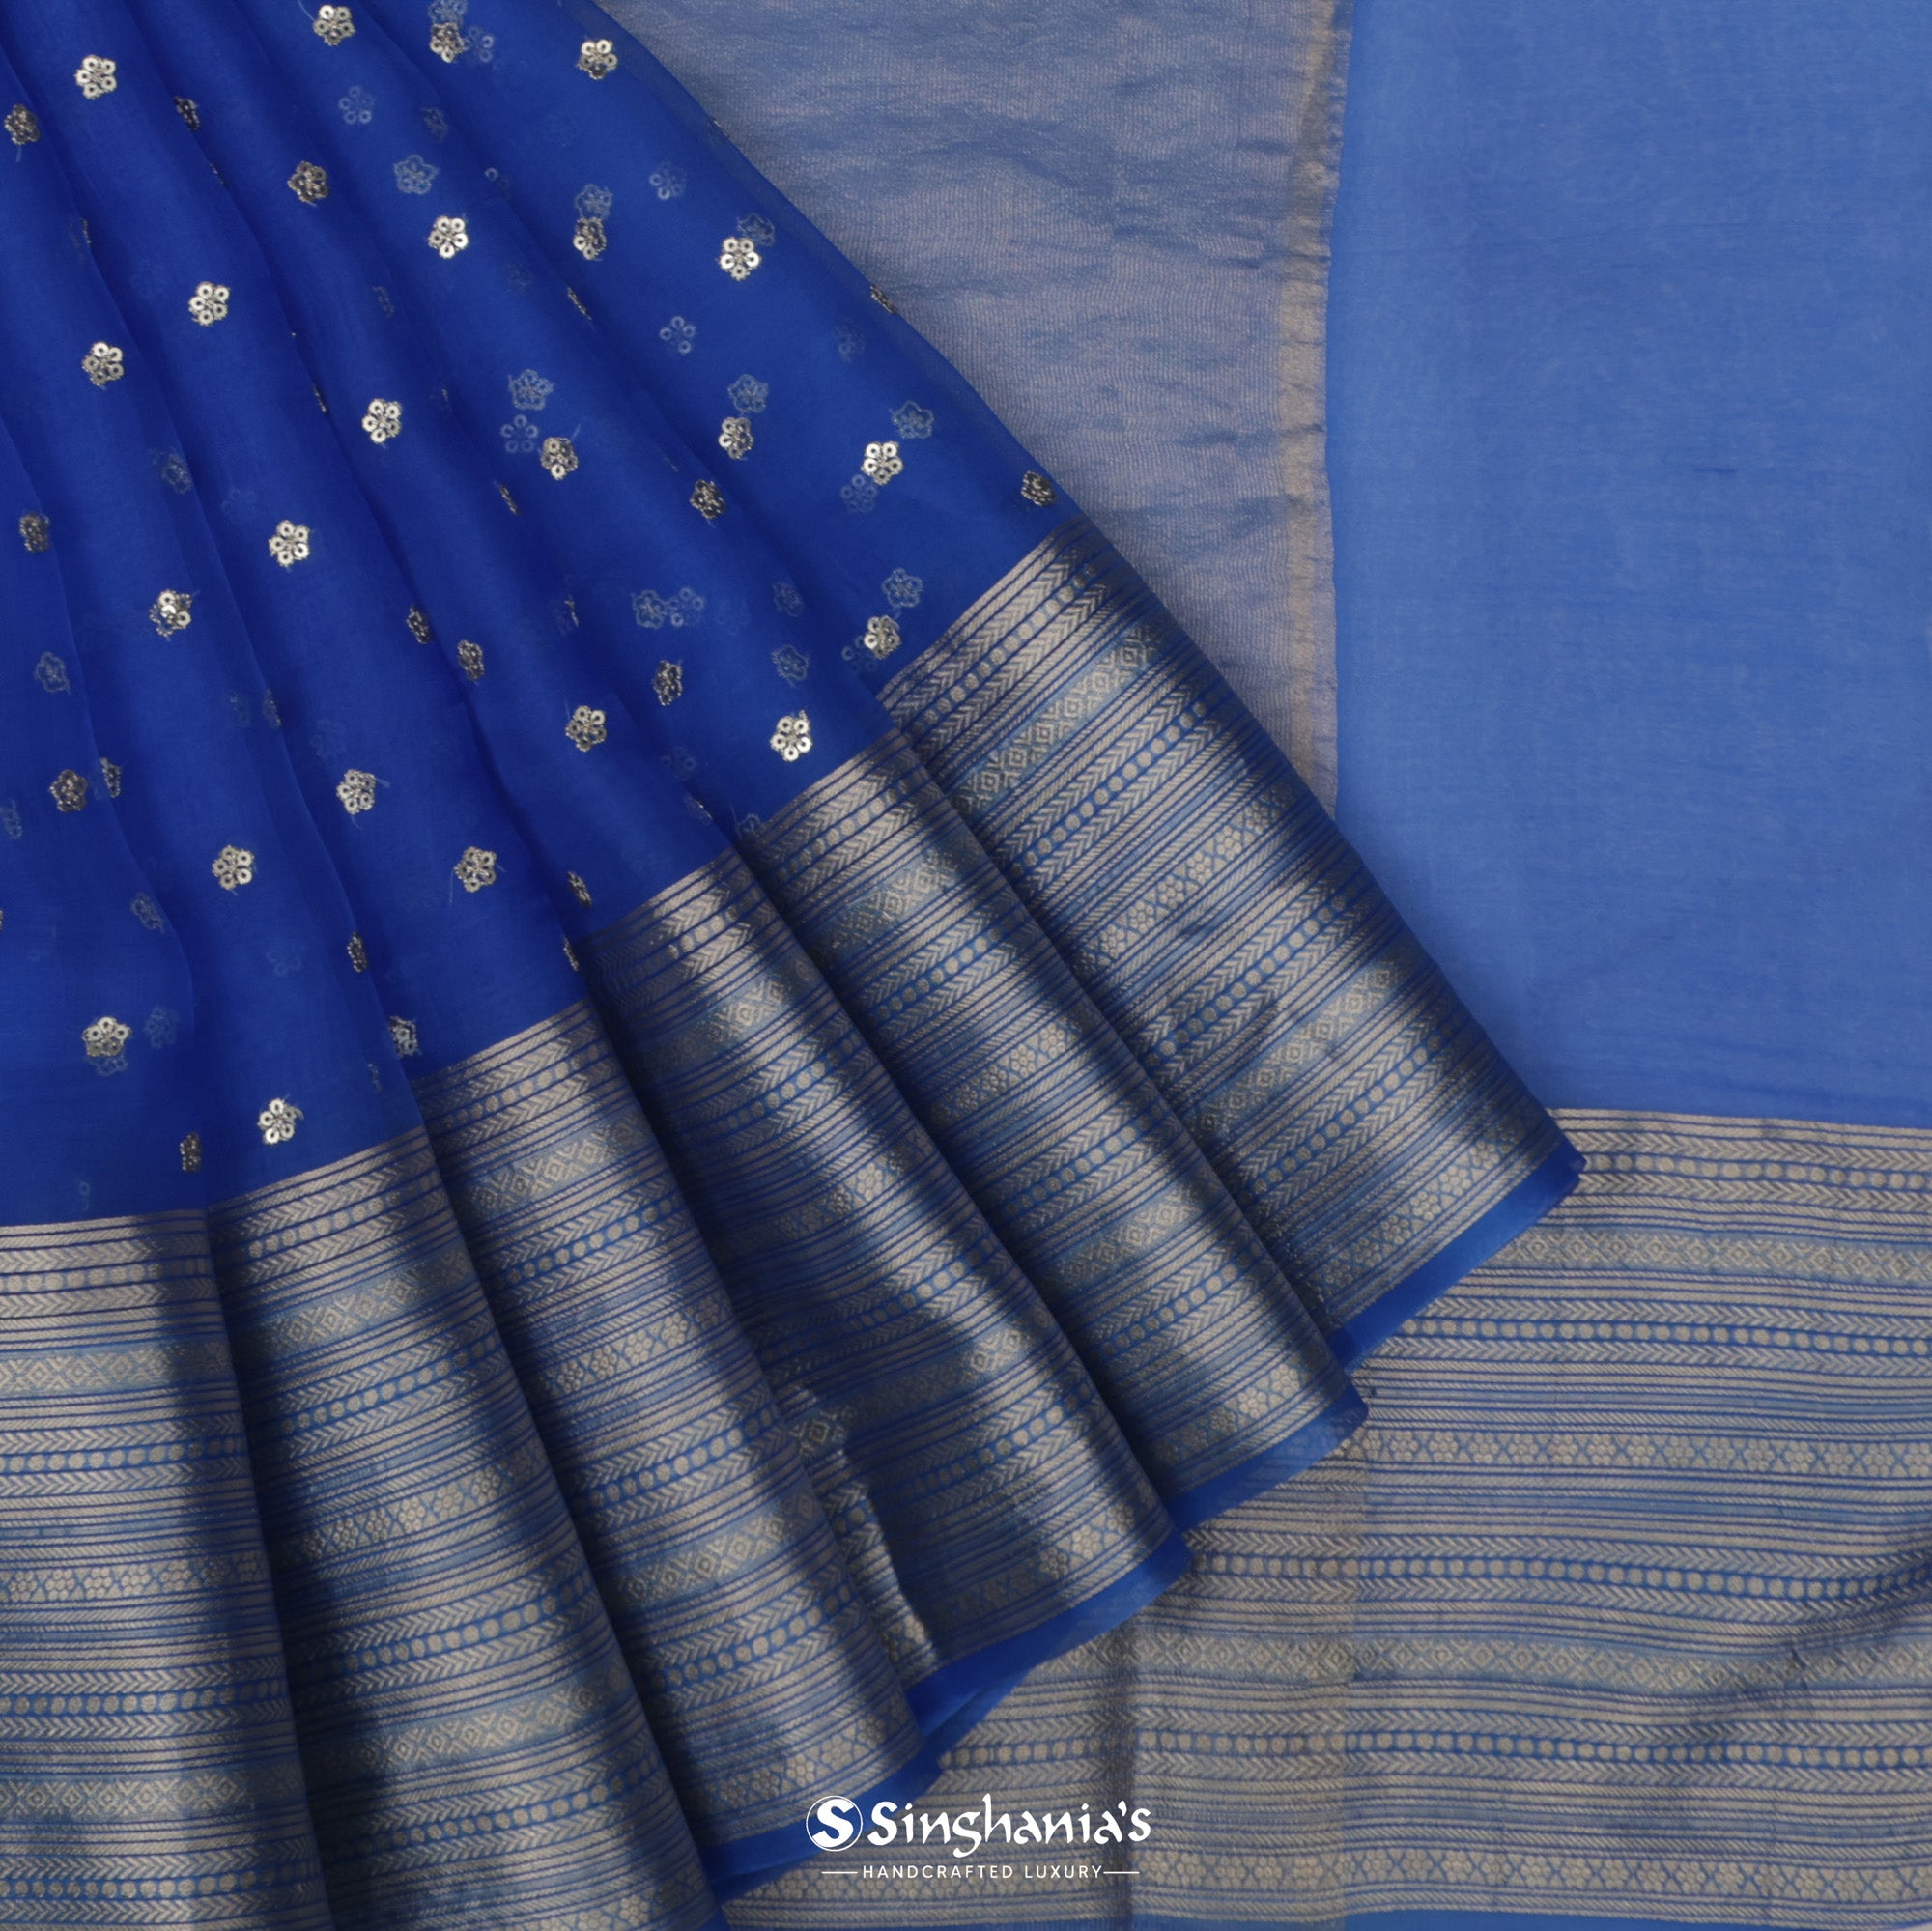 Resolution Blue Organza Saree With Embroidery